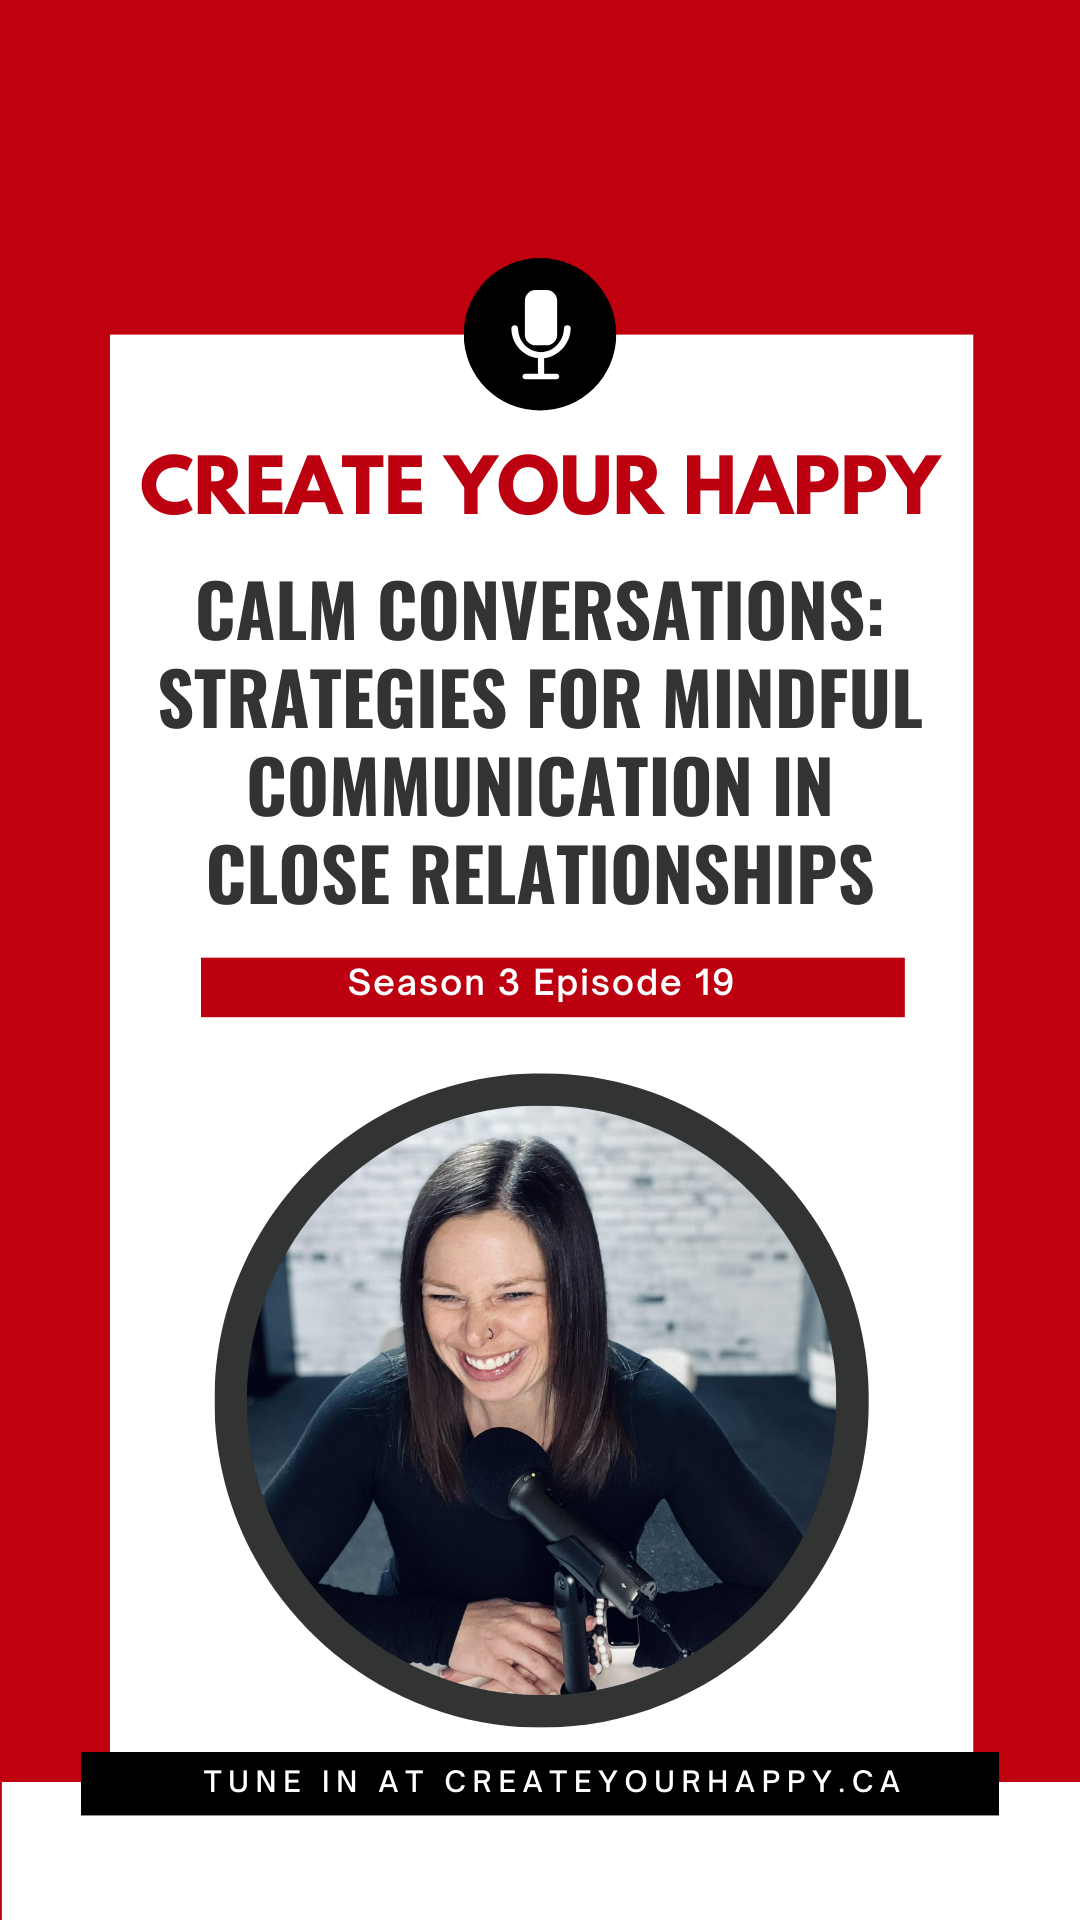 Calm Conversations: Strategies for Mindful Communication in Close Relationships